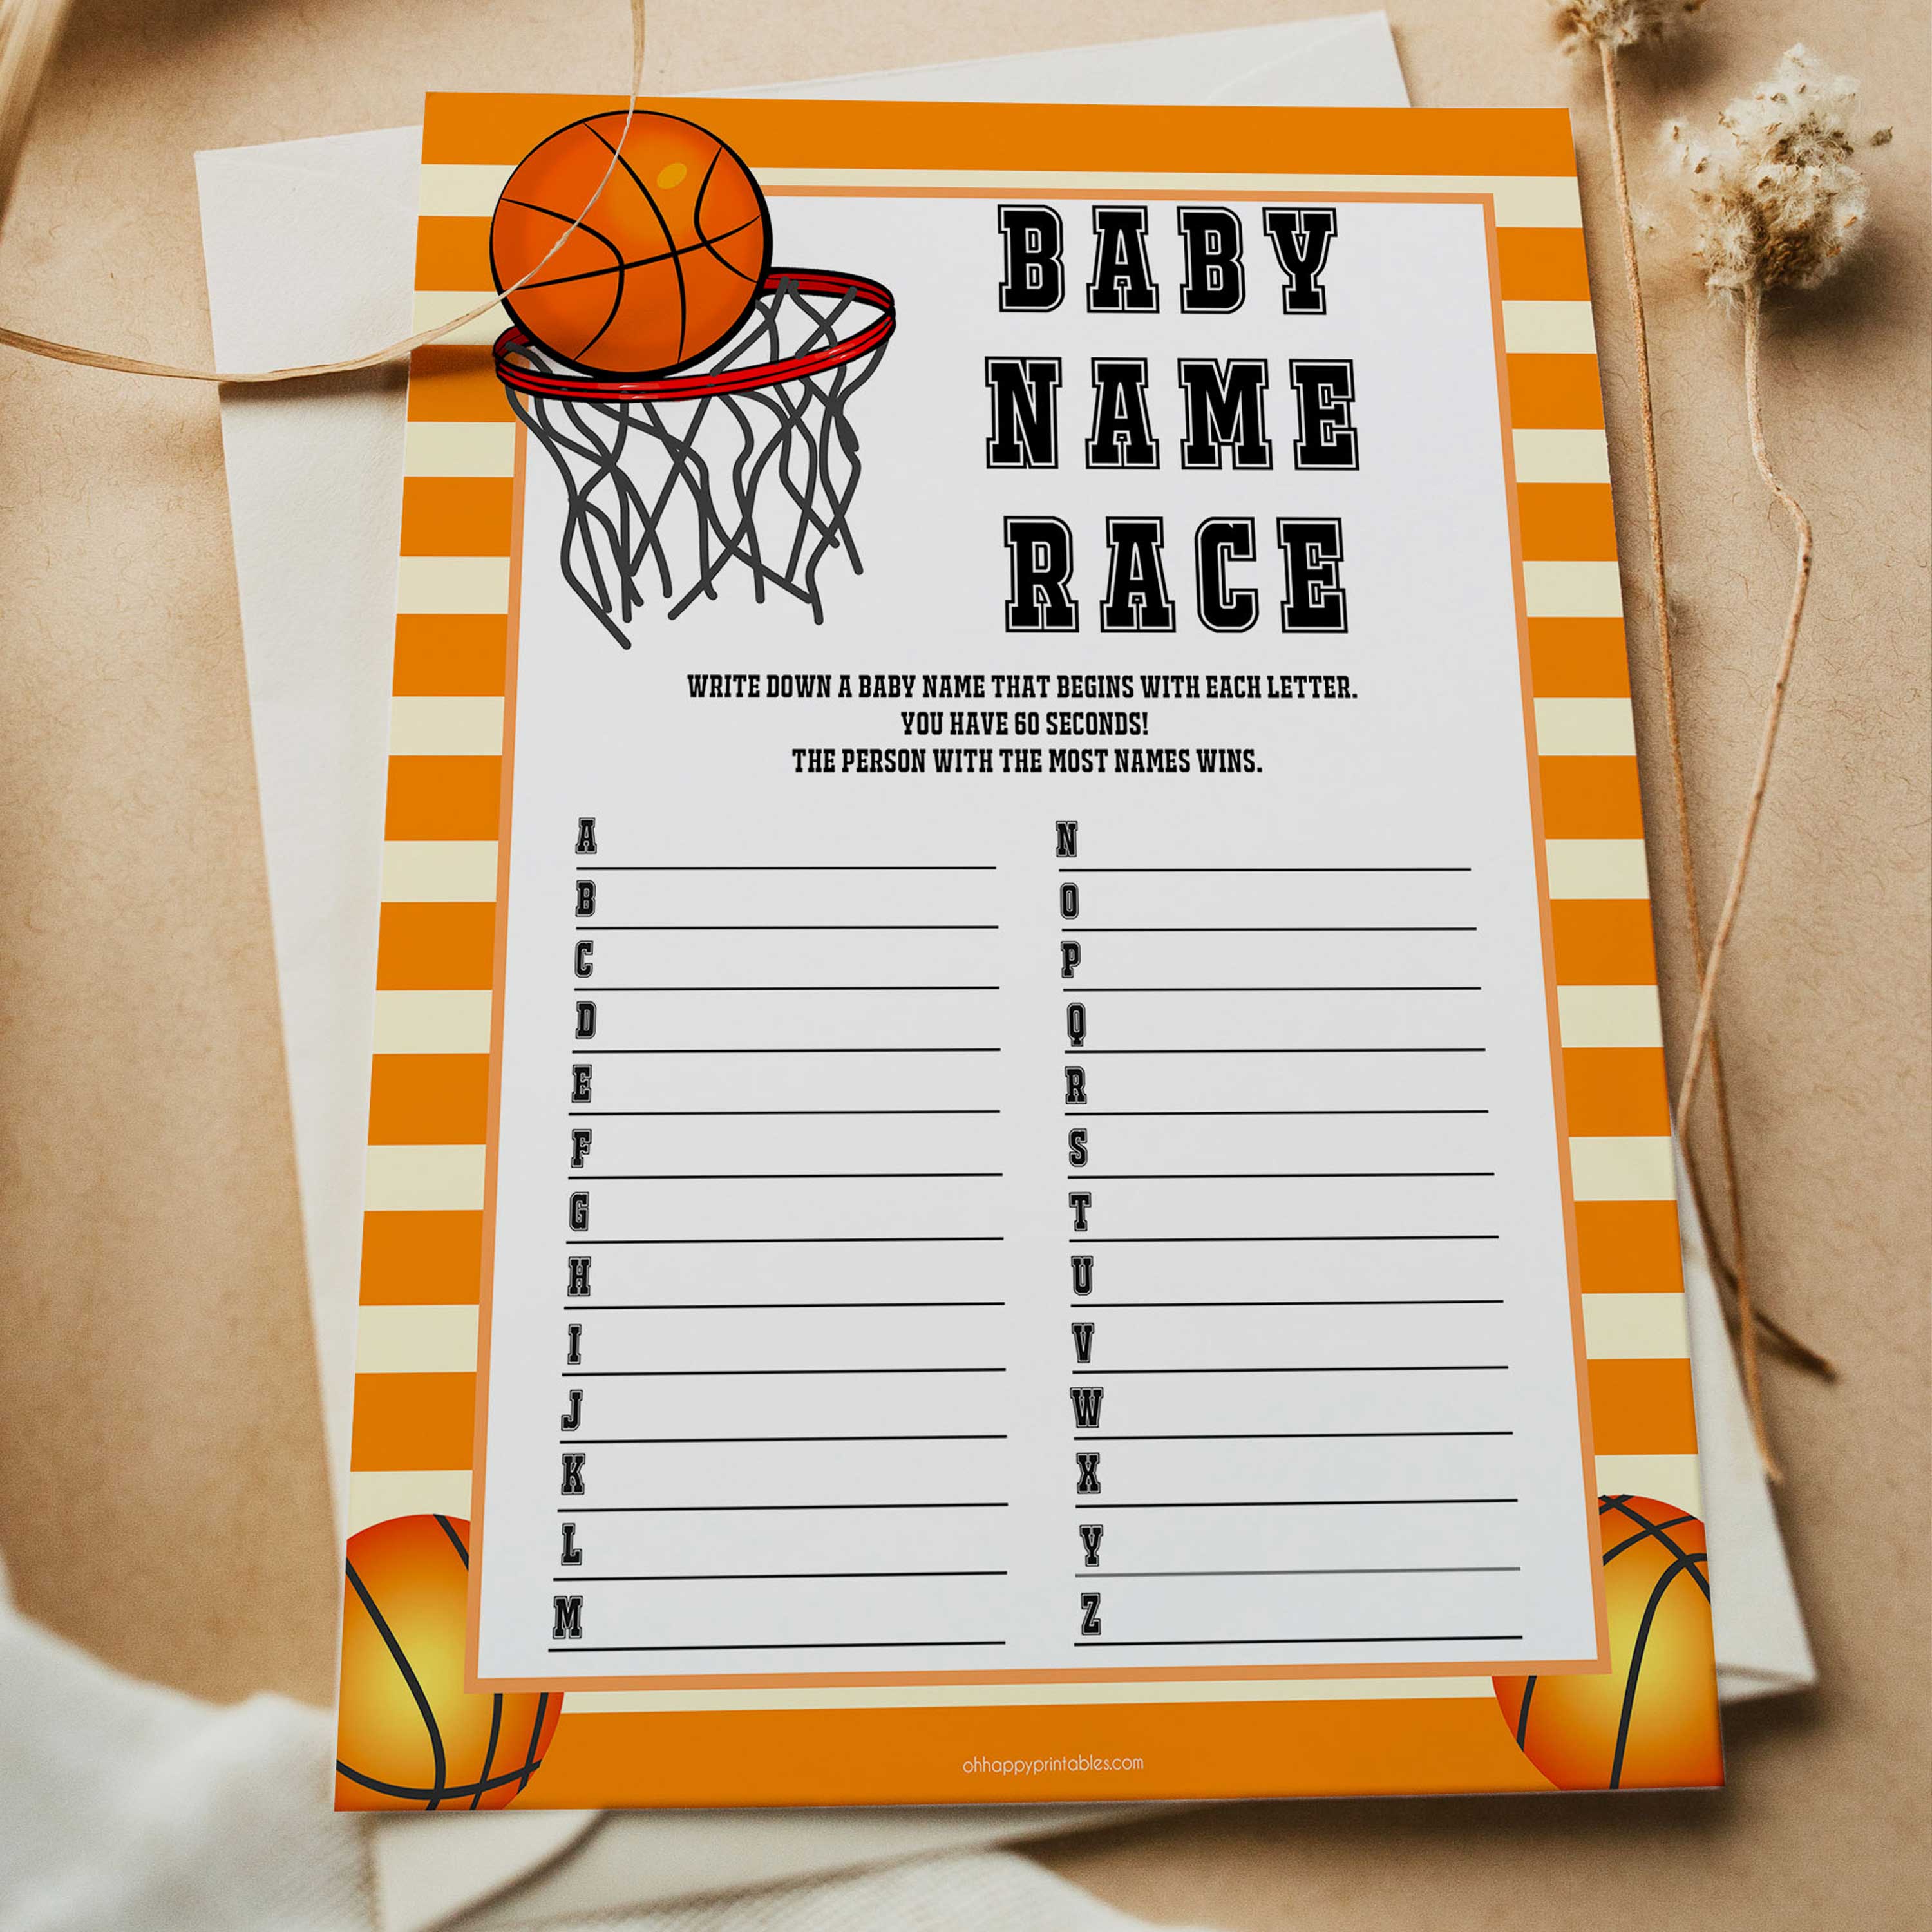 Basketball baby shower games, baby name race, baby game, printable baby games, basket baby games, baby shower games, basketball baby shower idea, fun baby games, popular baby games